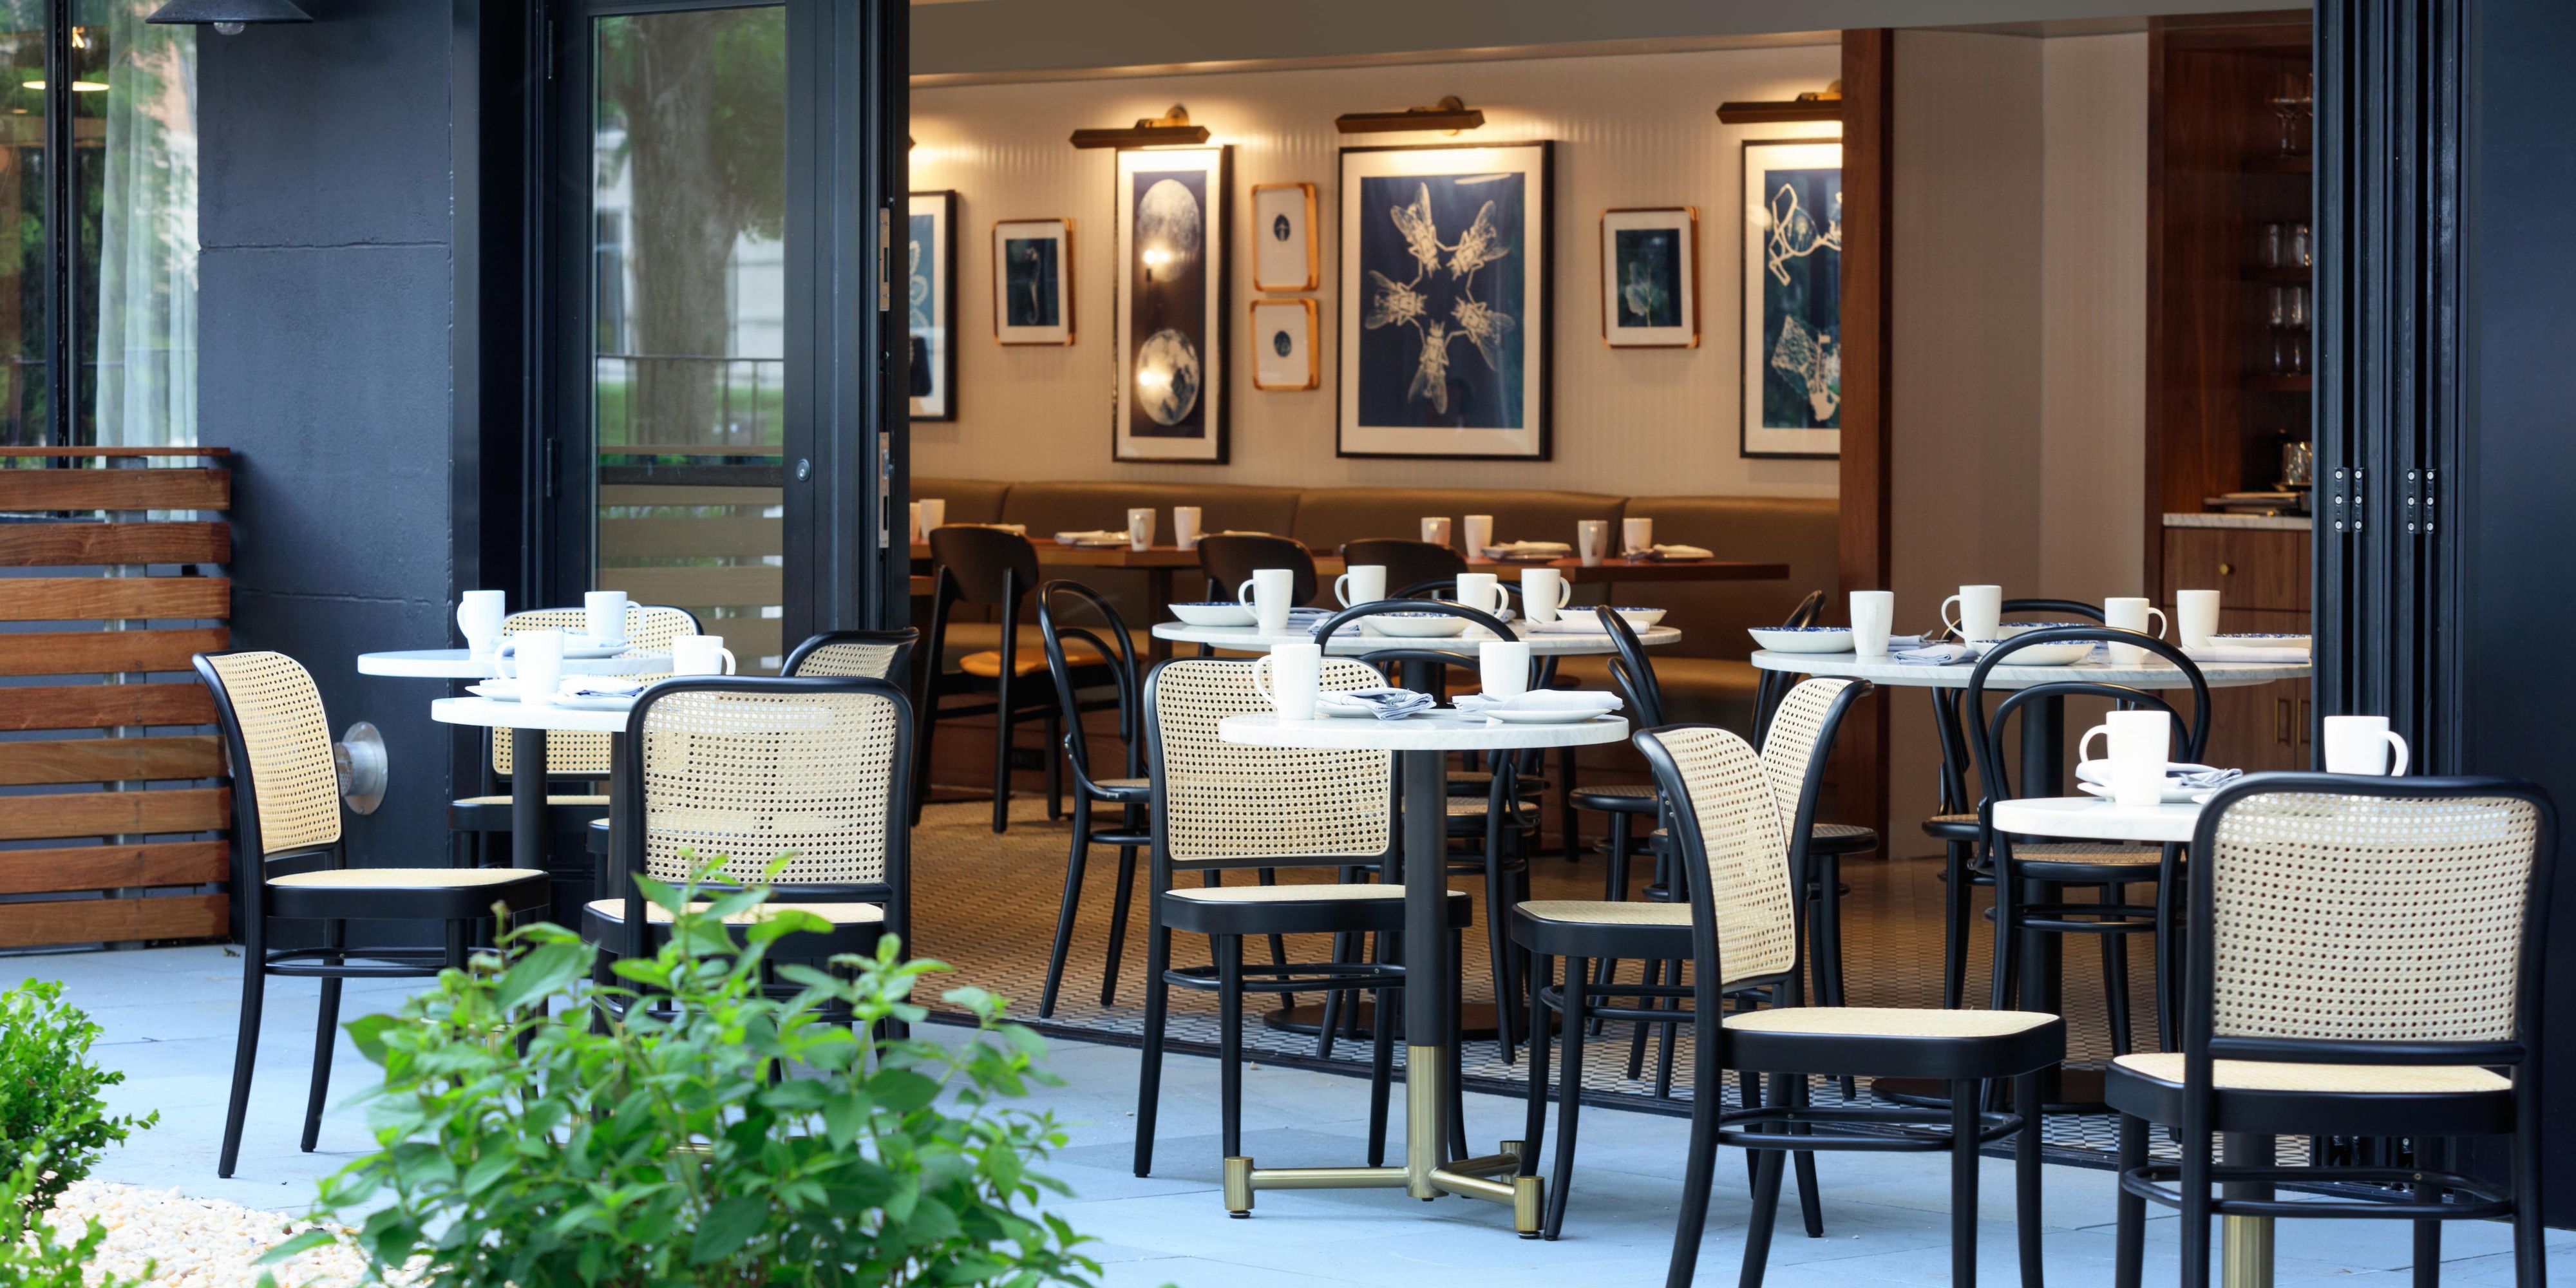 Patio garden dining and French cuisine with a modern day twist